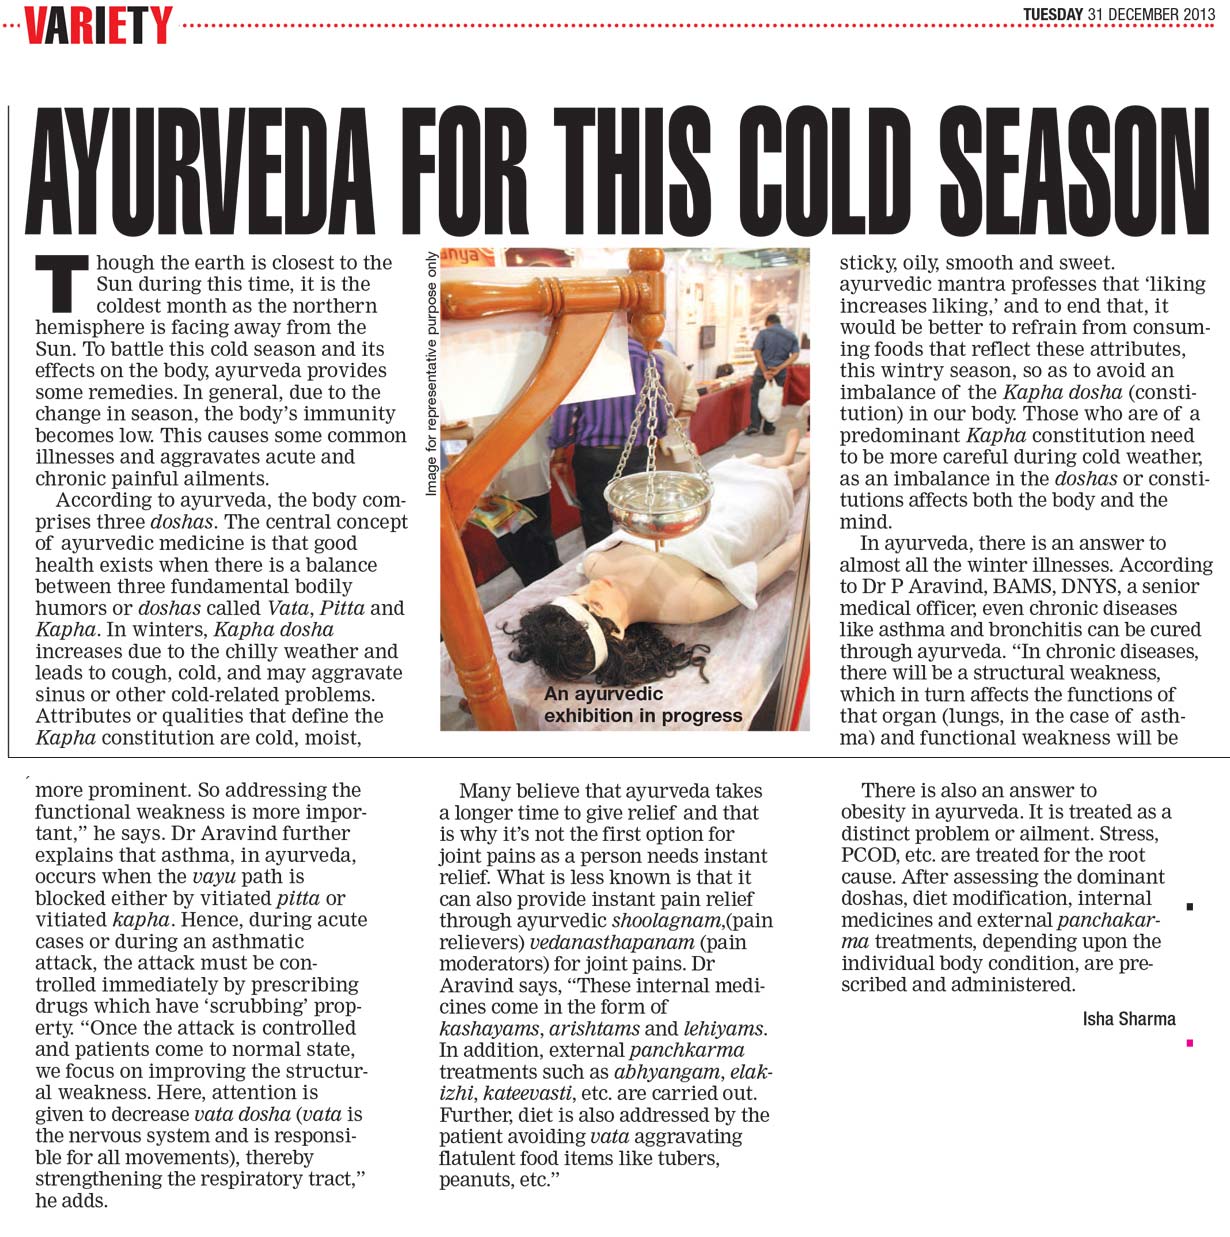 Ayurveda for this Cold Season - The Times of India